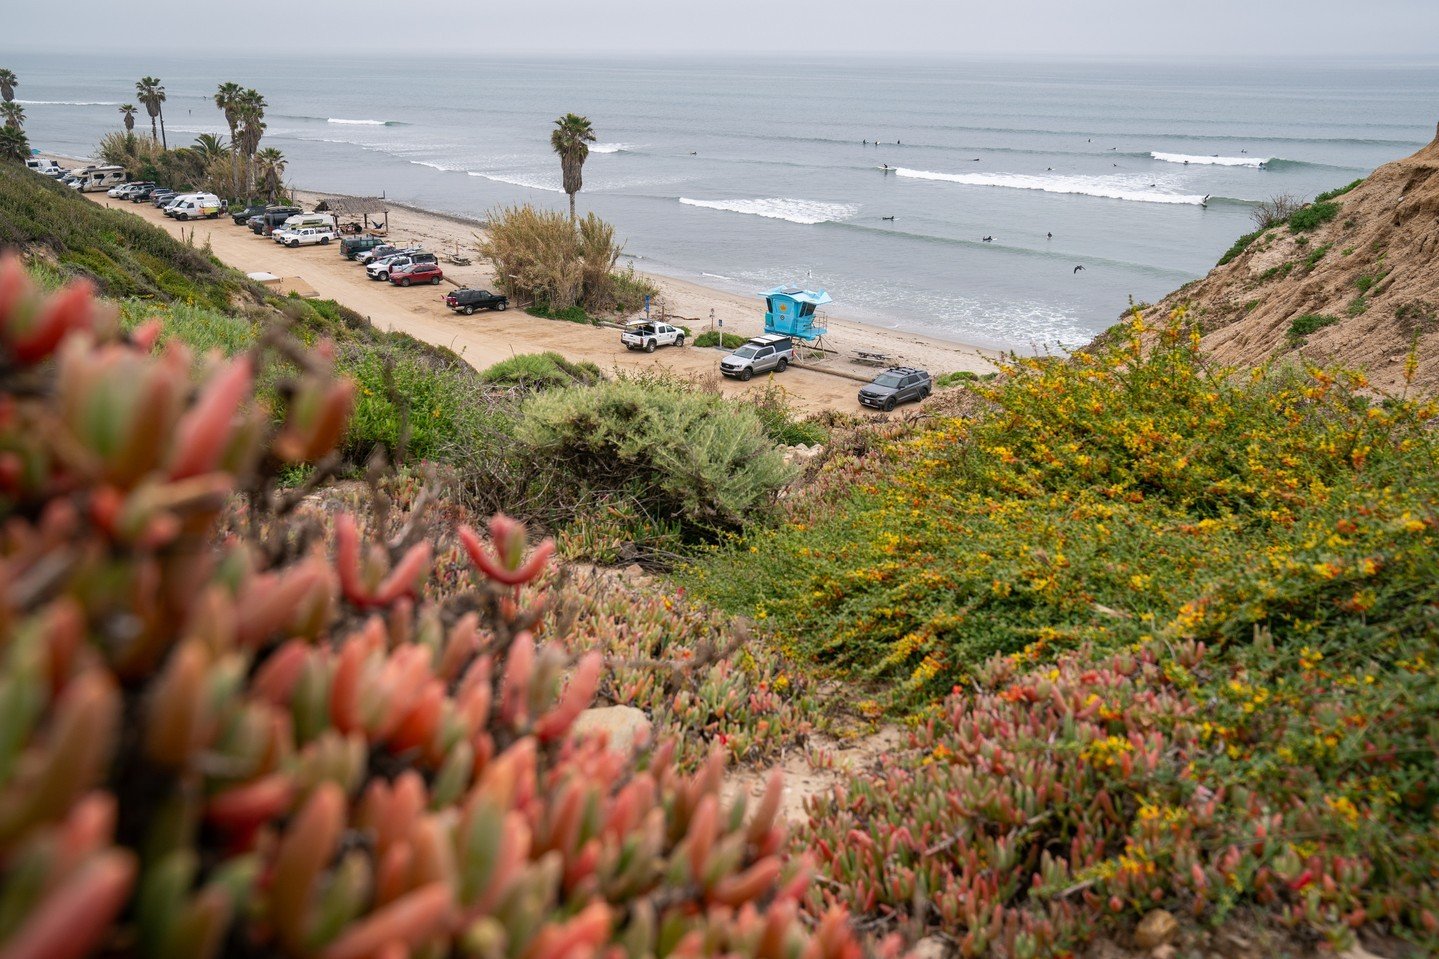 Just in time for the first legit run of south swells this season, the parking lot at San Onofre is now reopened. The lower lot at San O had been closed since a powerful El Ni&ntilde;o storm washed out the road in February. Repairs included rebuilding